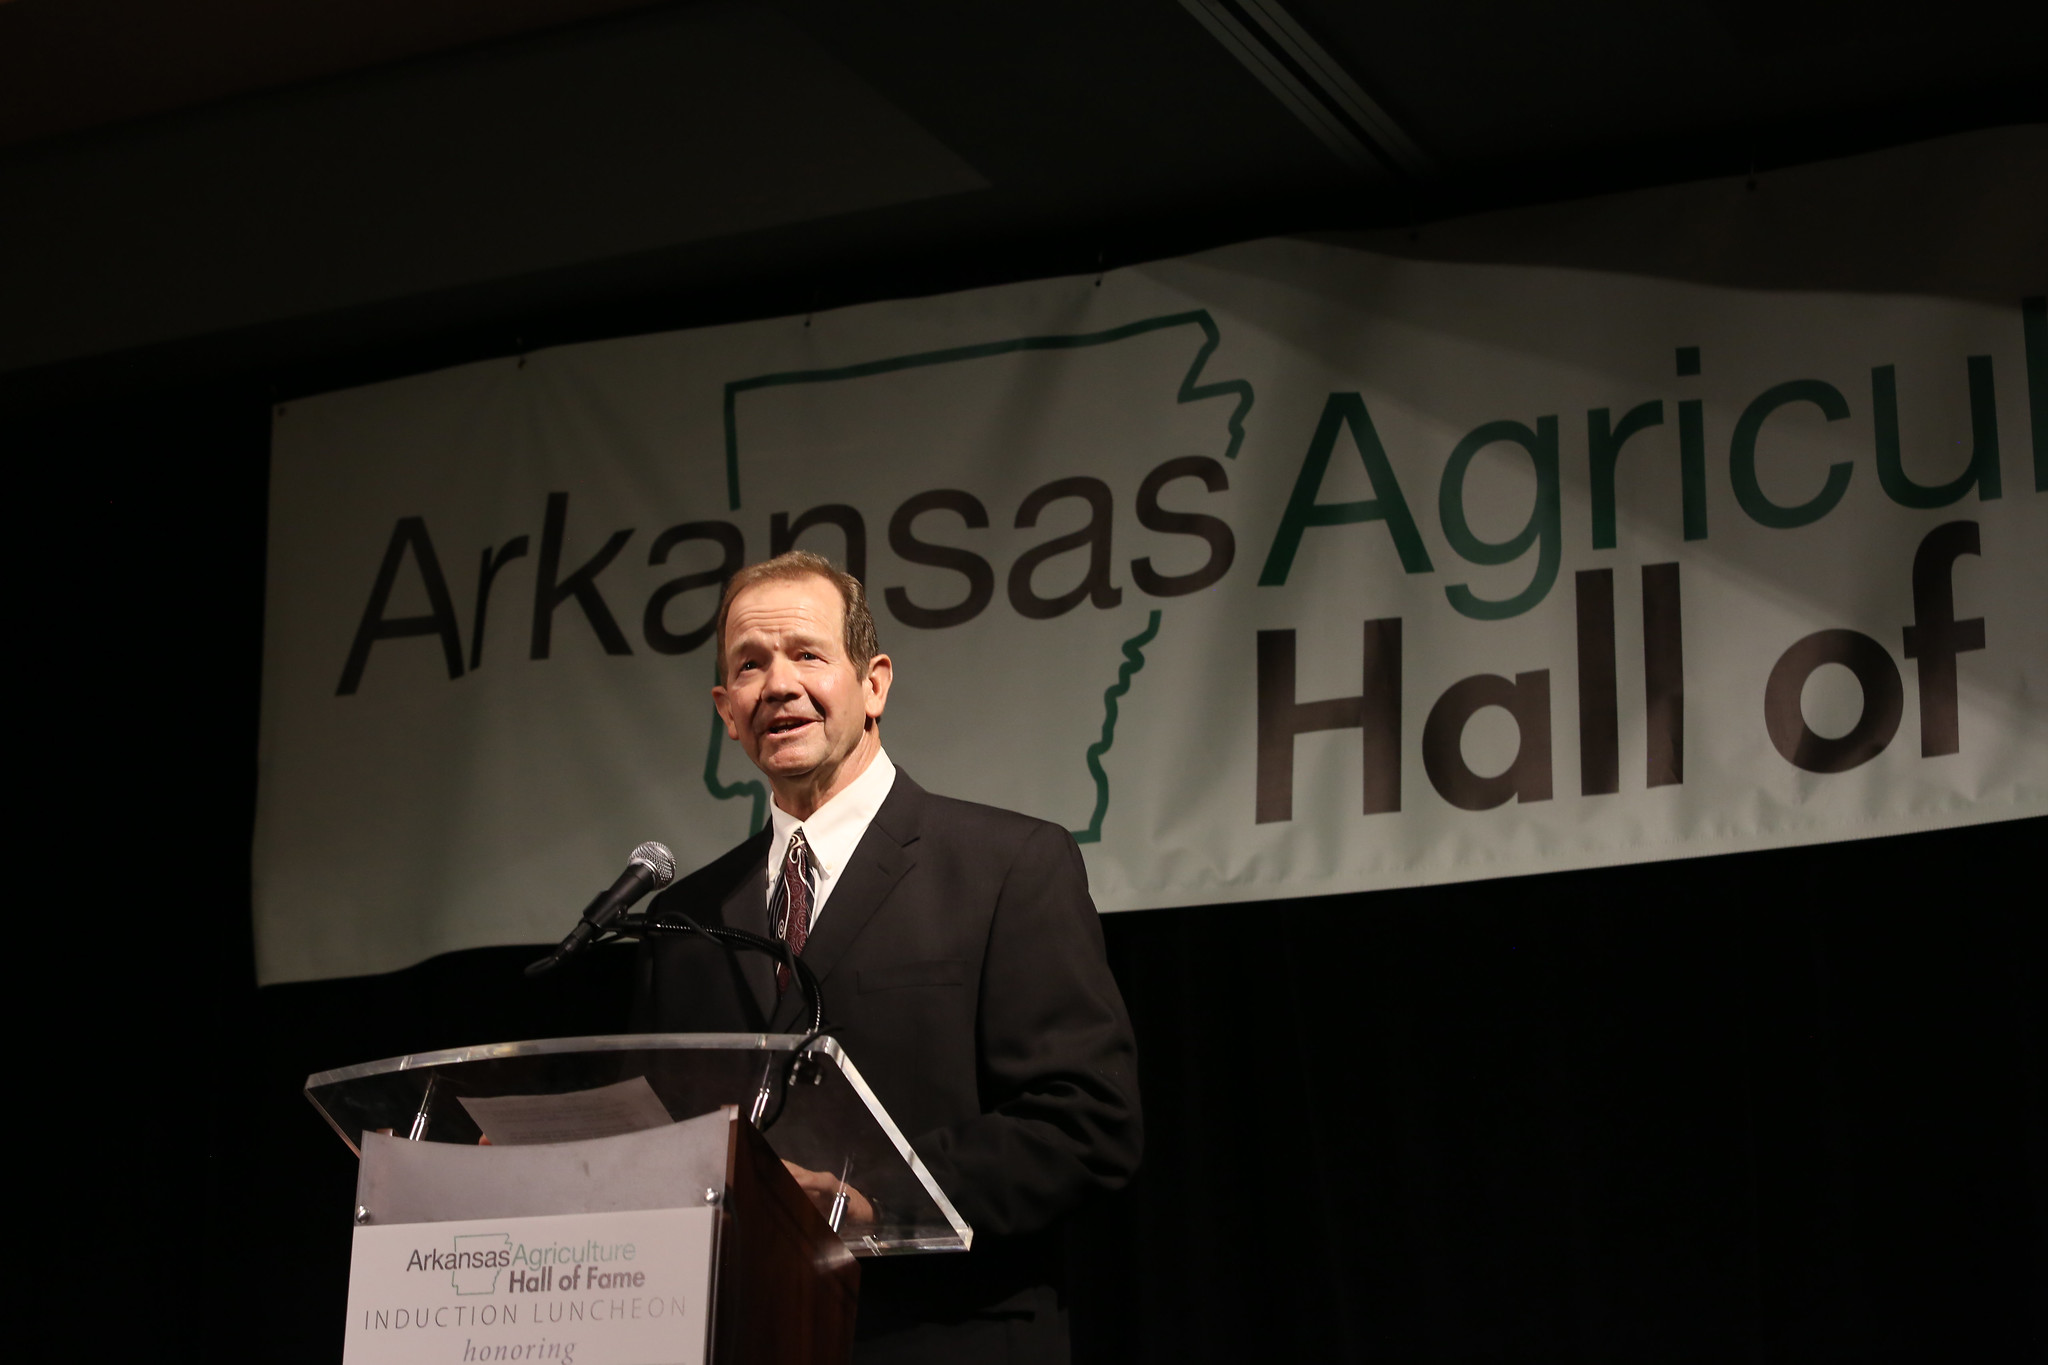 Terry Siebenmorgen inducted into Arkansas Ag Hall of Fame